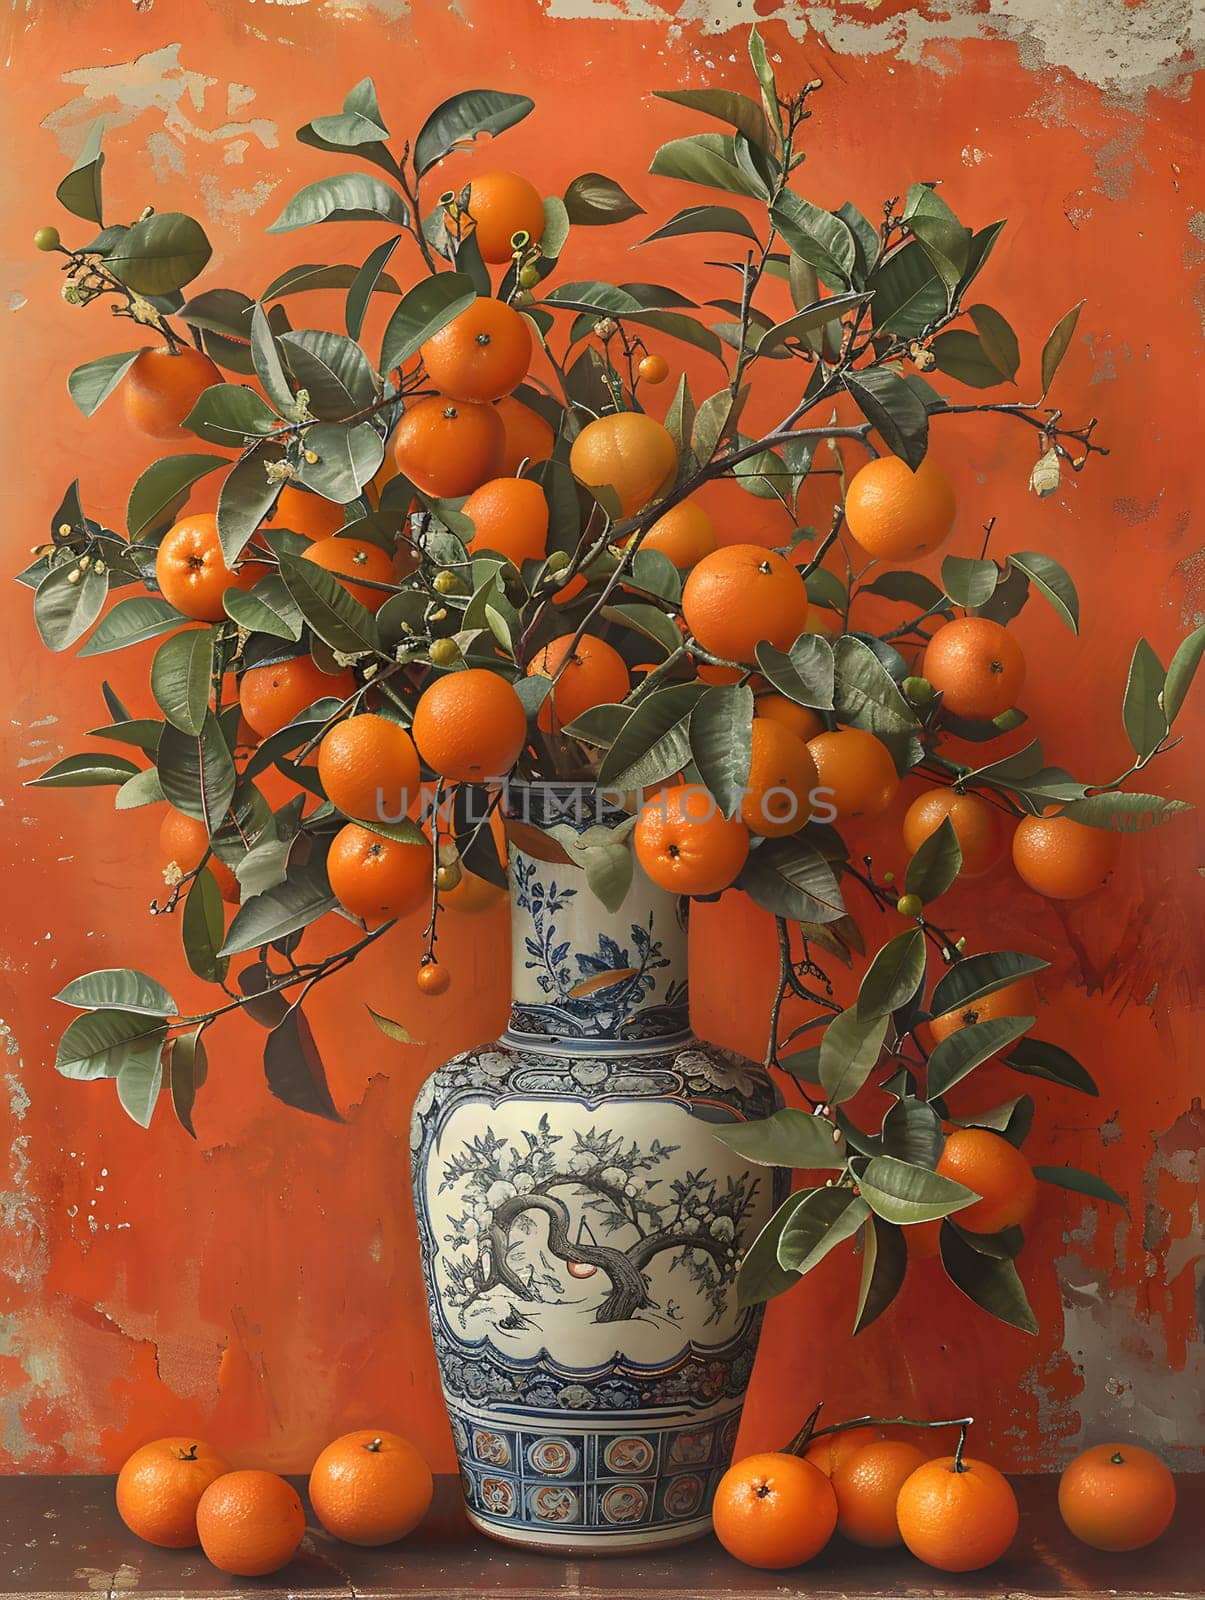 Blue and white flowerpot with citrus fruits in front of an orange wall by Nadtochiy